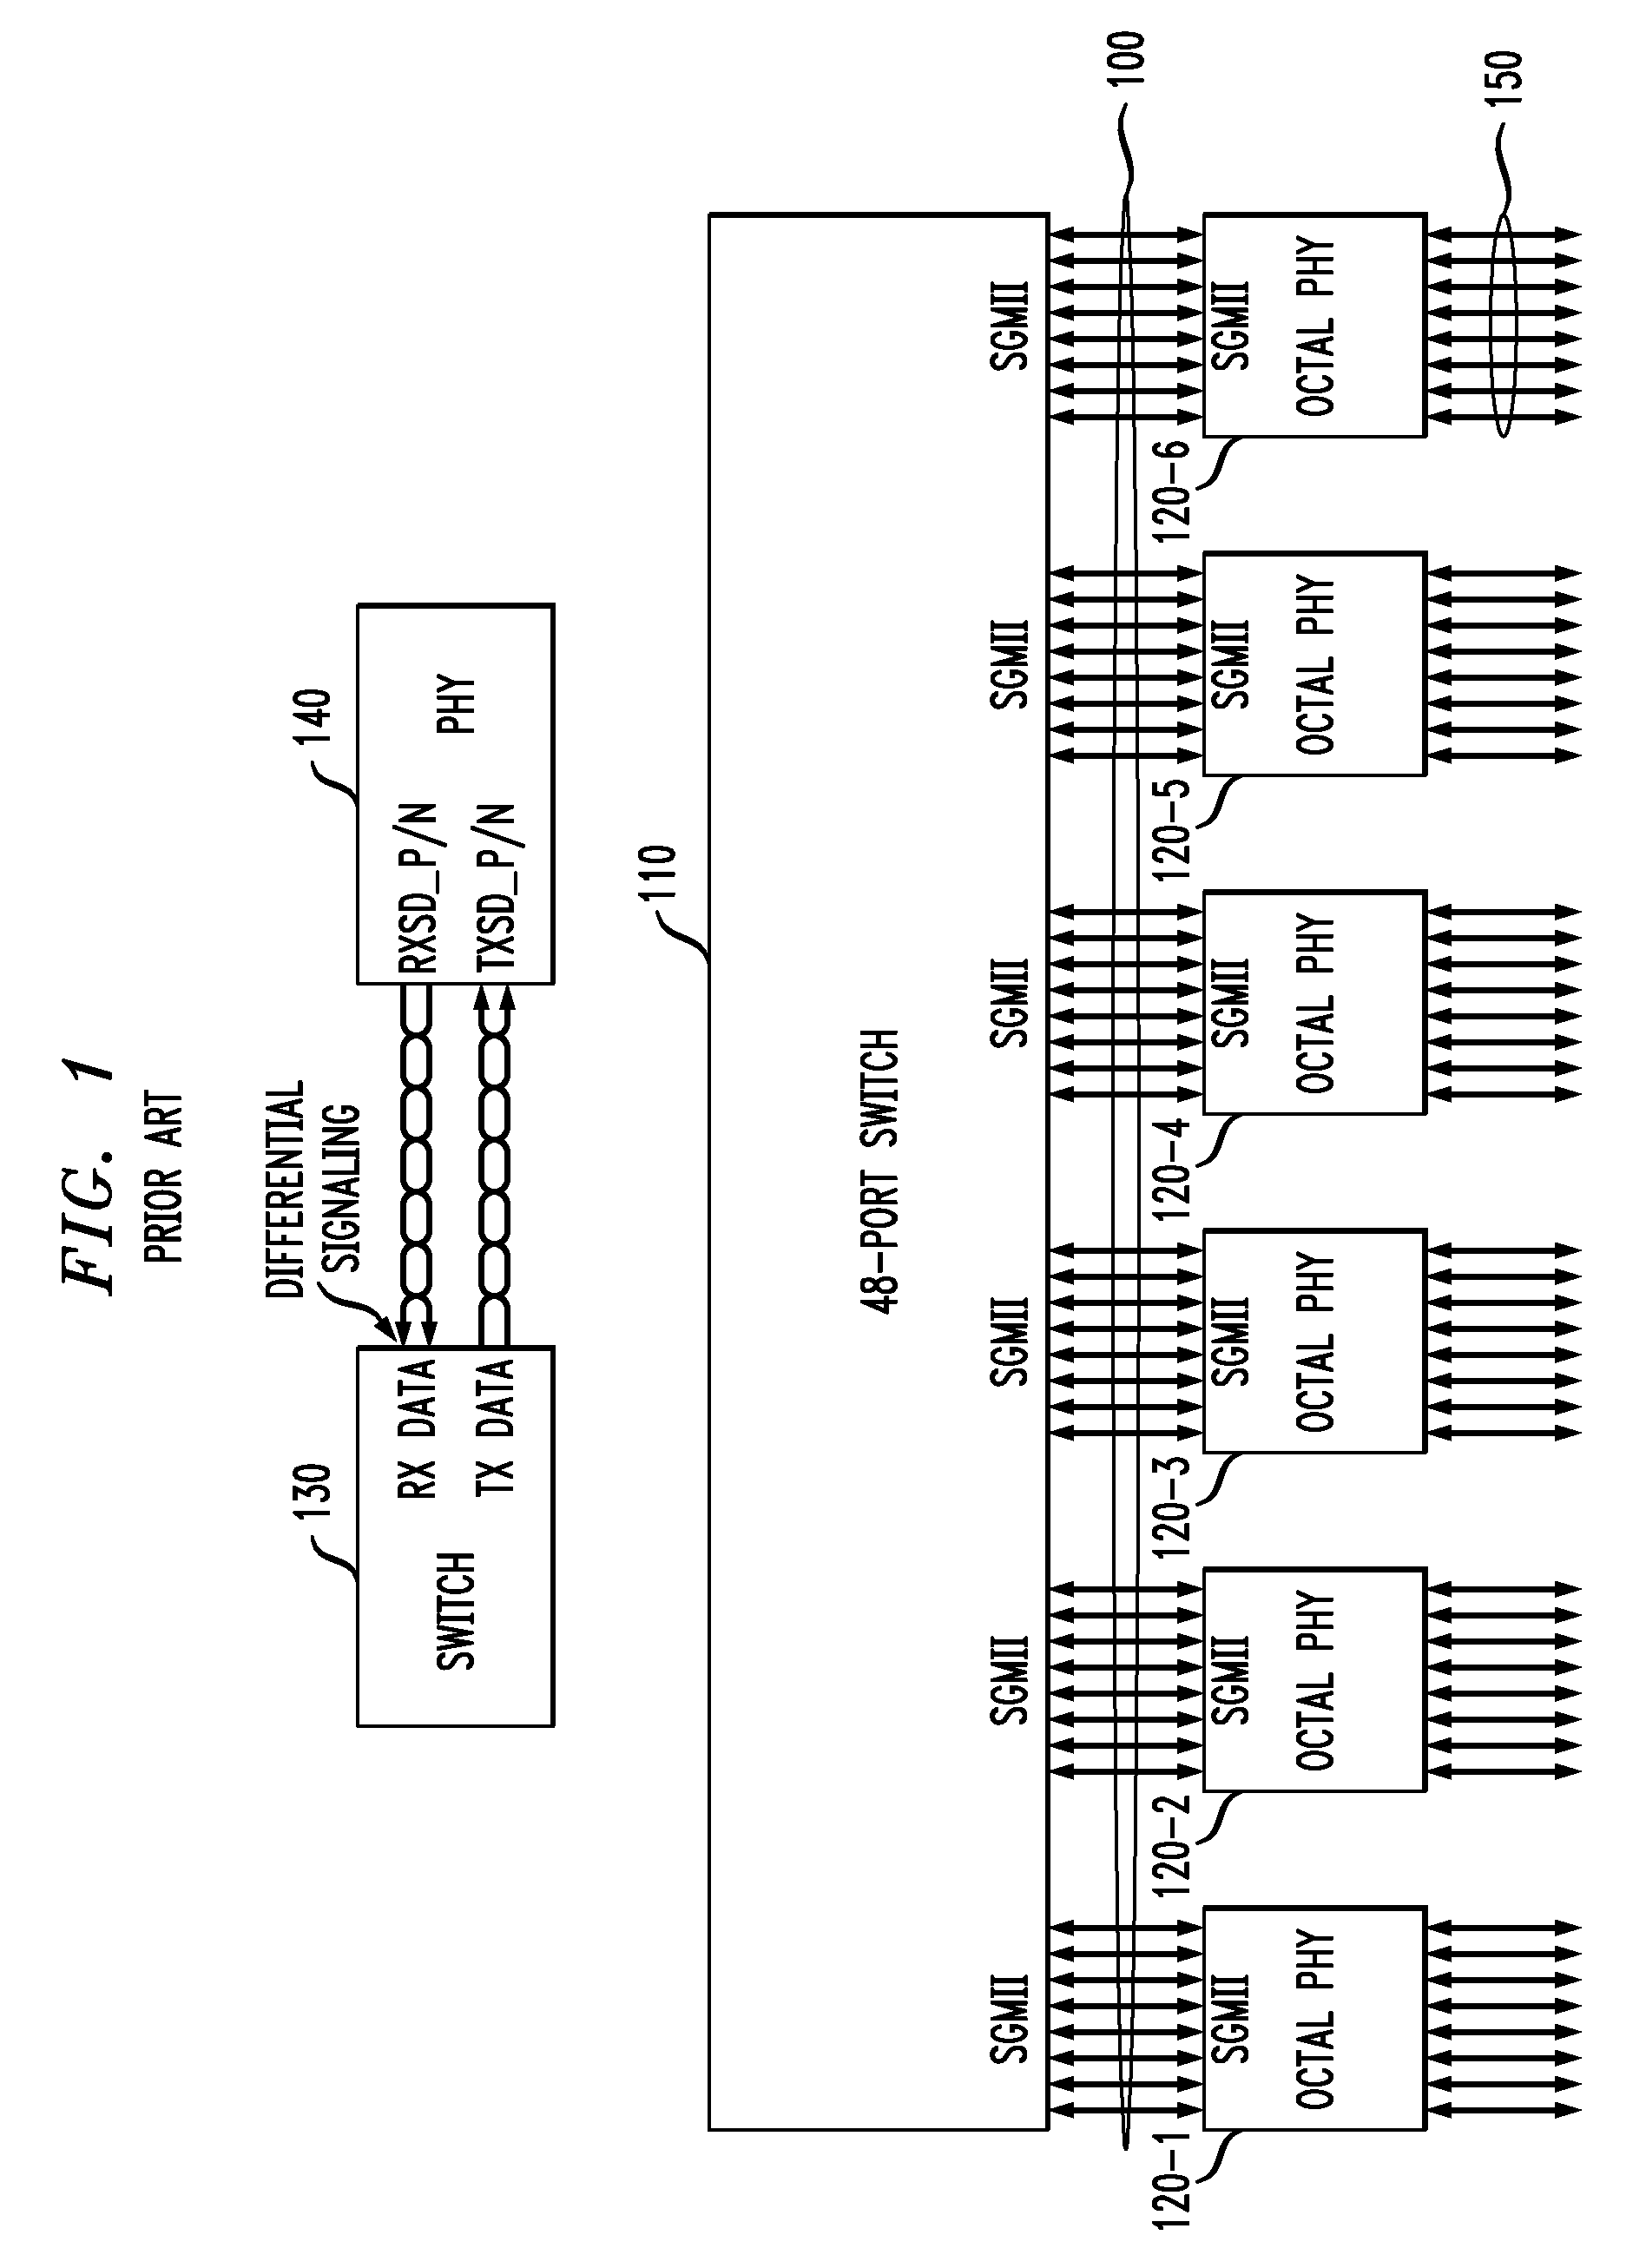 Methods And Apparatus For Interfacing A Plurality Of Encoded Serial Data Streams To A Serializer/Deserializer Circuit